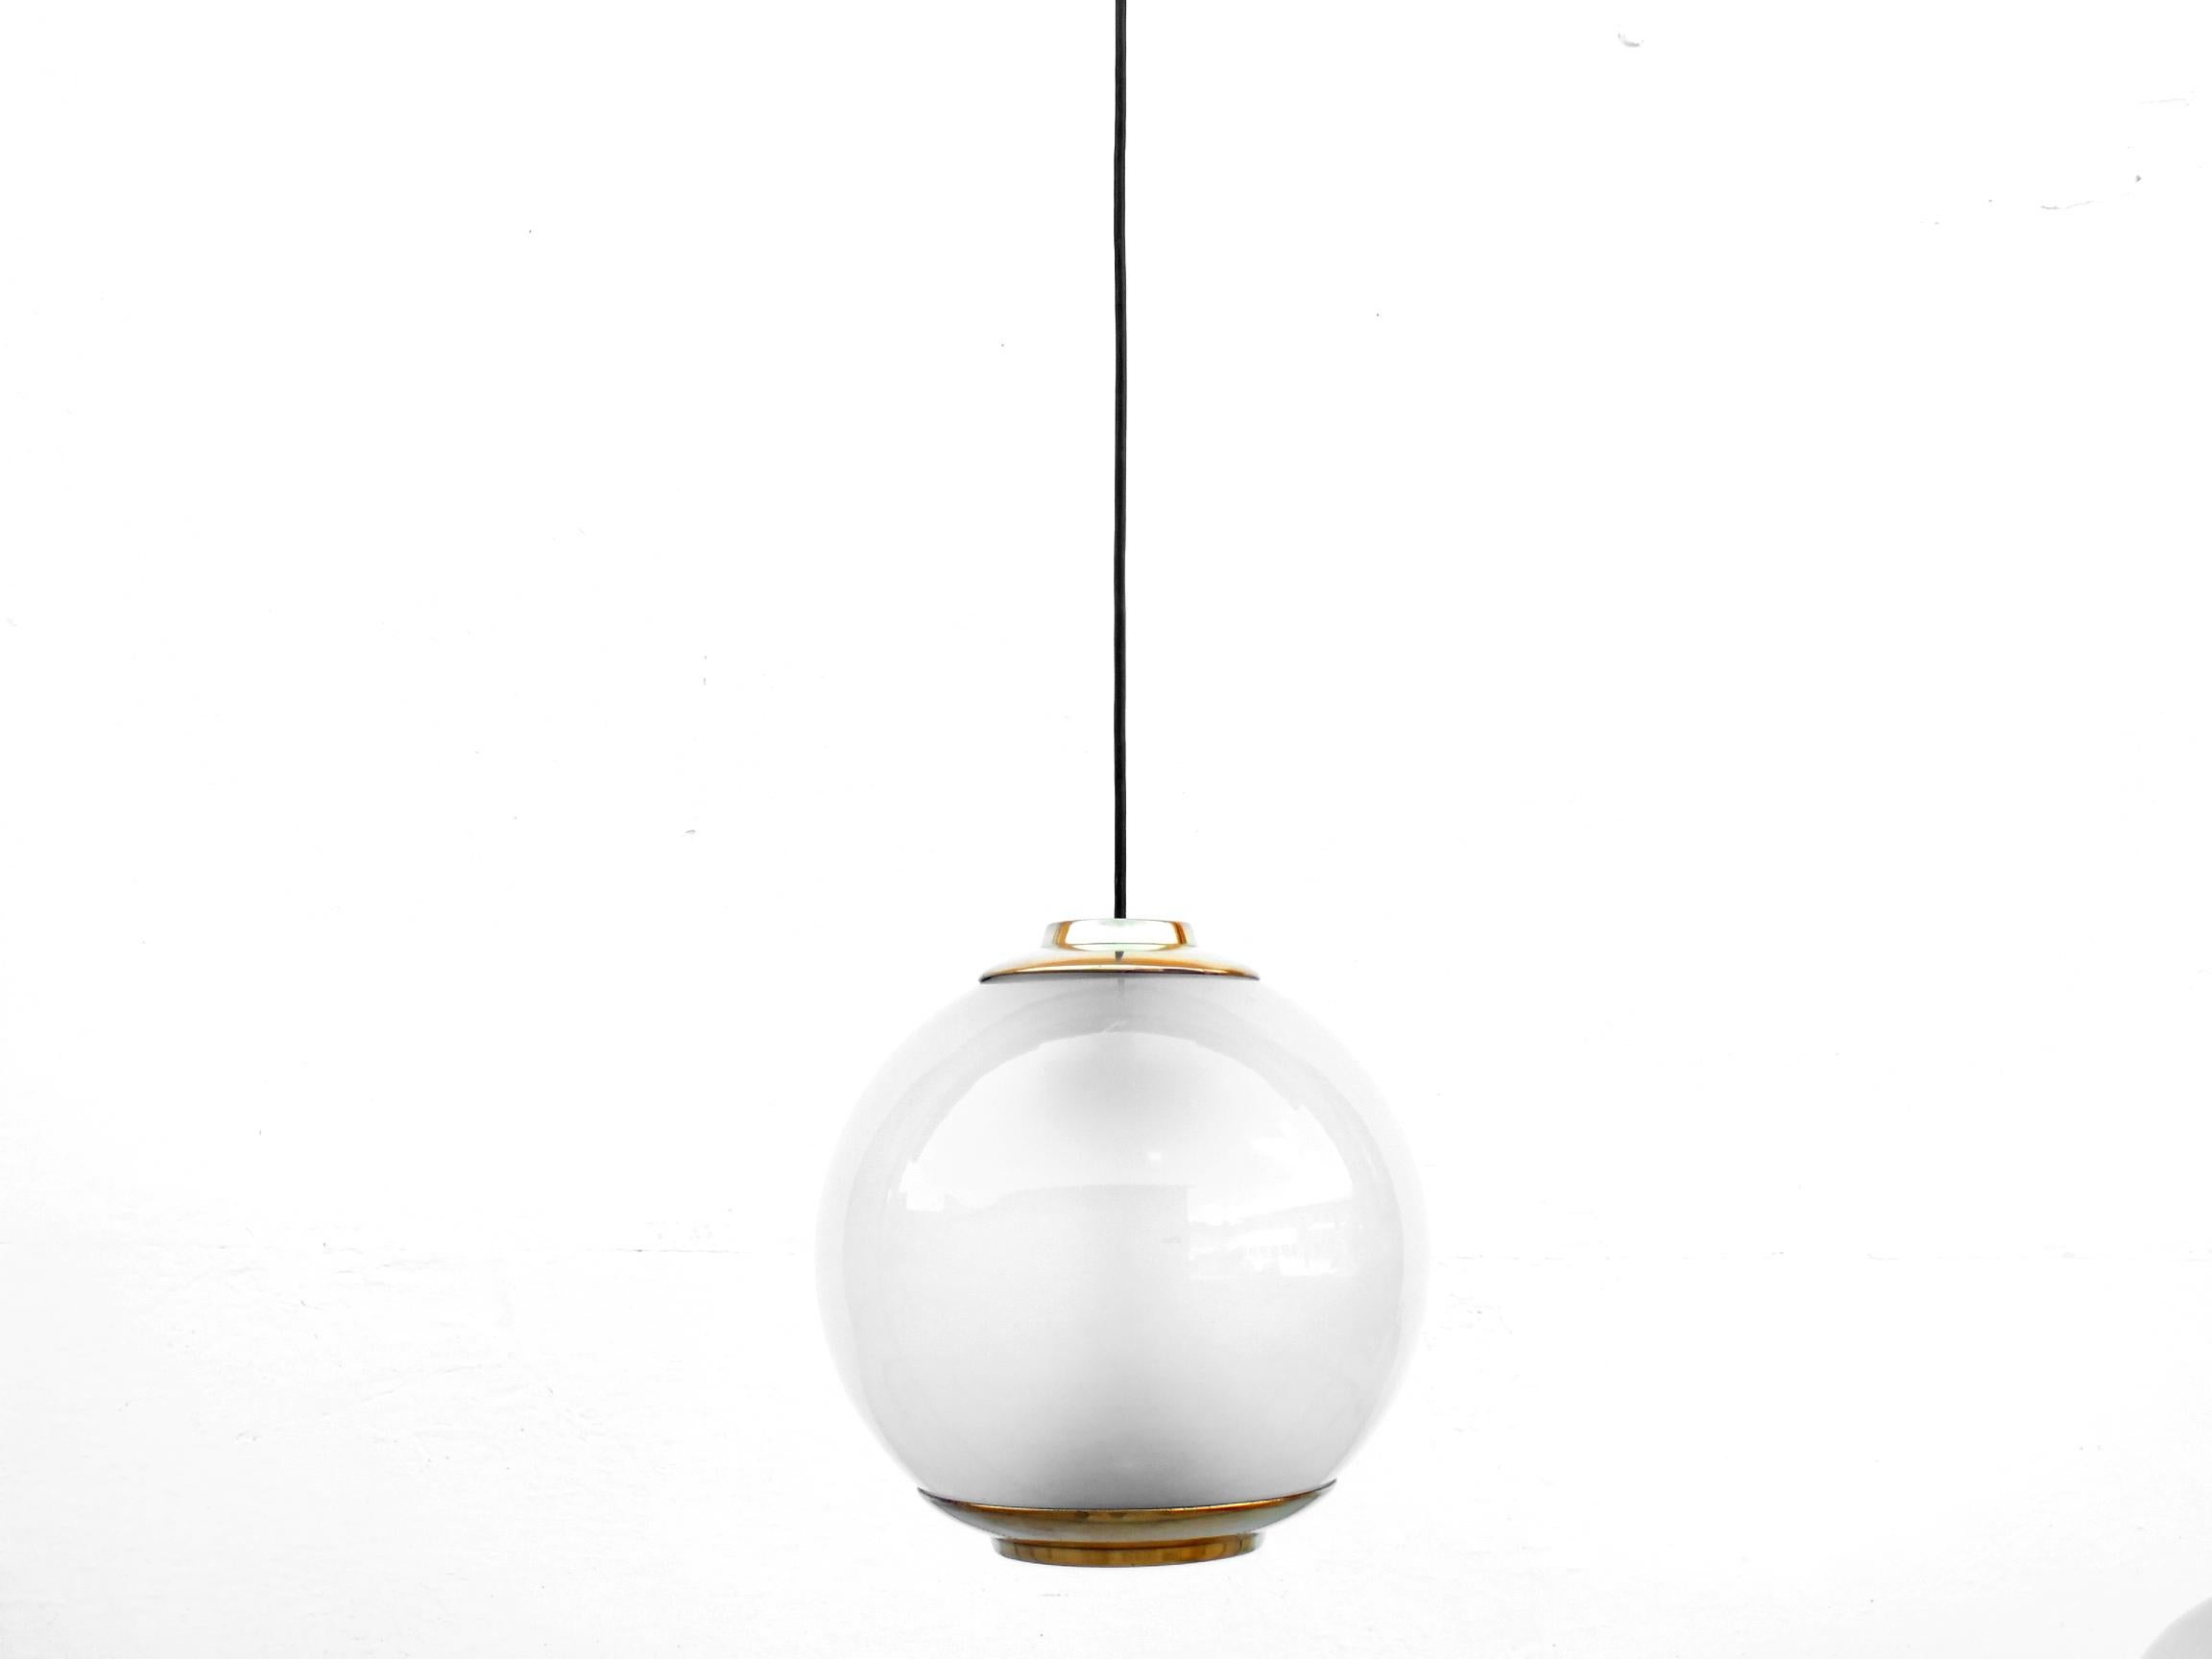 Luigi Caccia Dominioni design one rare big ball ceiling lamps Ls2 by Azucena Italy production in years '52 The piece features a spherical milk glass shade as well as a mounting in polished brass and ceiling black cable. La vente est pour un